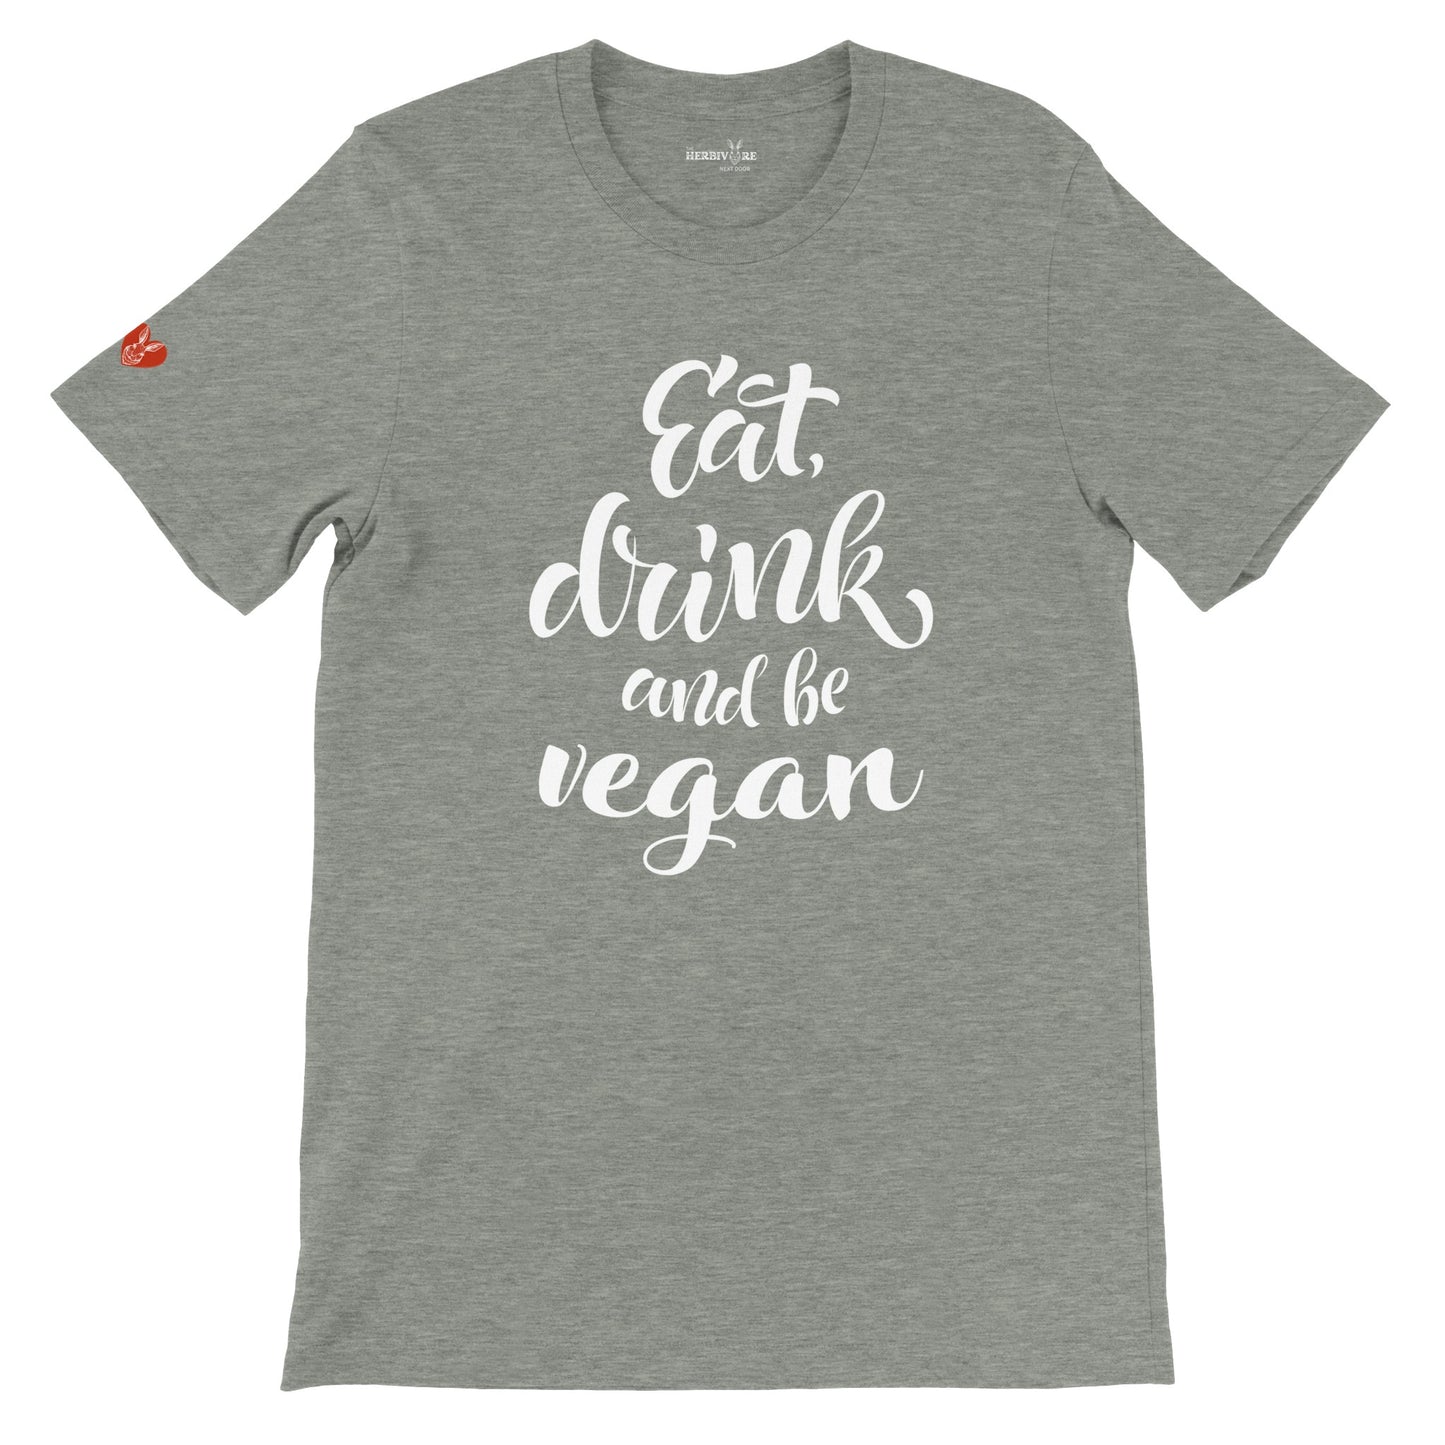 Eat, Drink, and be Vegan - Unisex